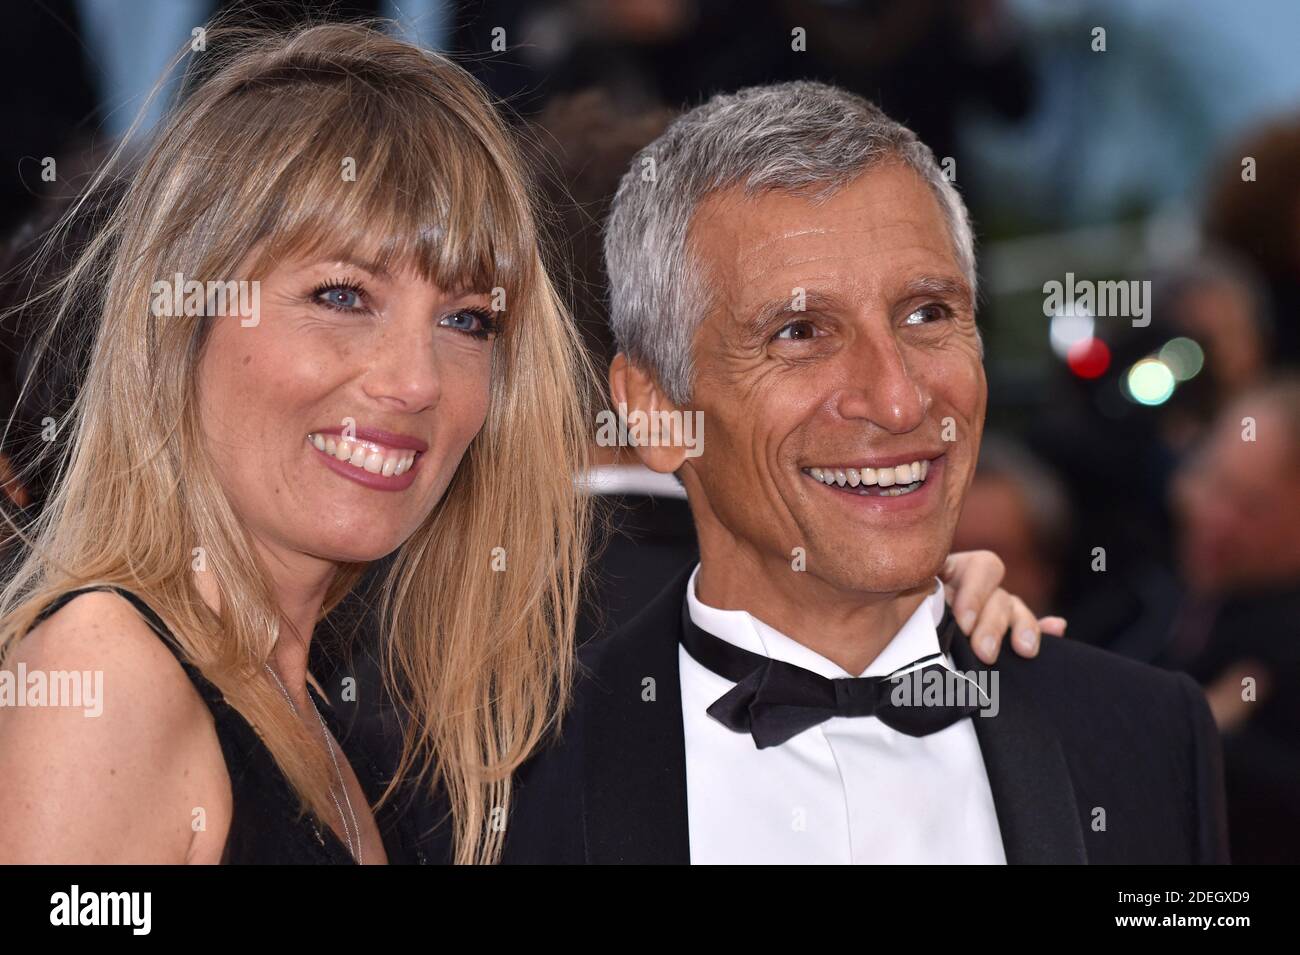 Nagui attends the screening of 'Pain And Glory (Dolor Y Gloria/ Douleur Et Glorie)' during the 72nd annual Cannes Film Festival on May 17, 2019 in Cannes, France. Photo by Lionel Hahn/ABACAPRESS.COM Stock Photo